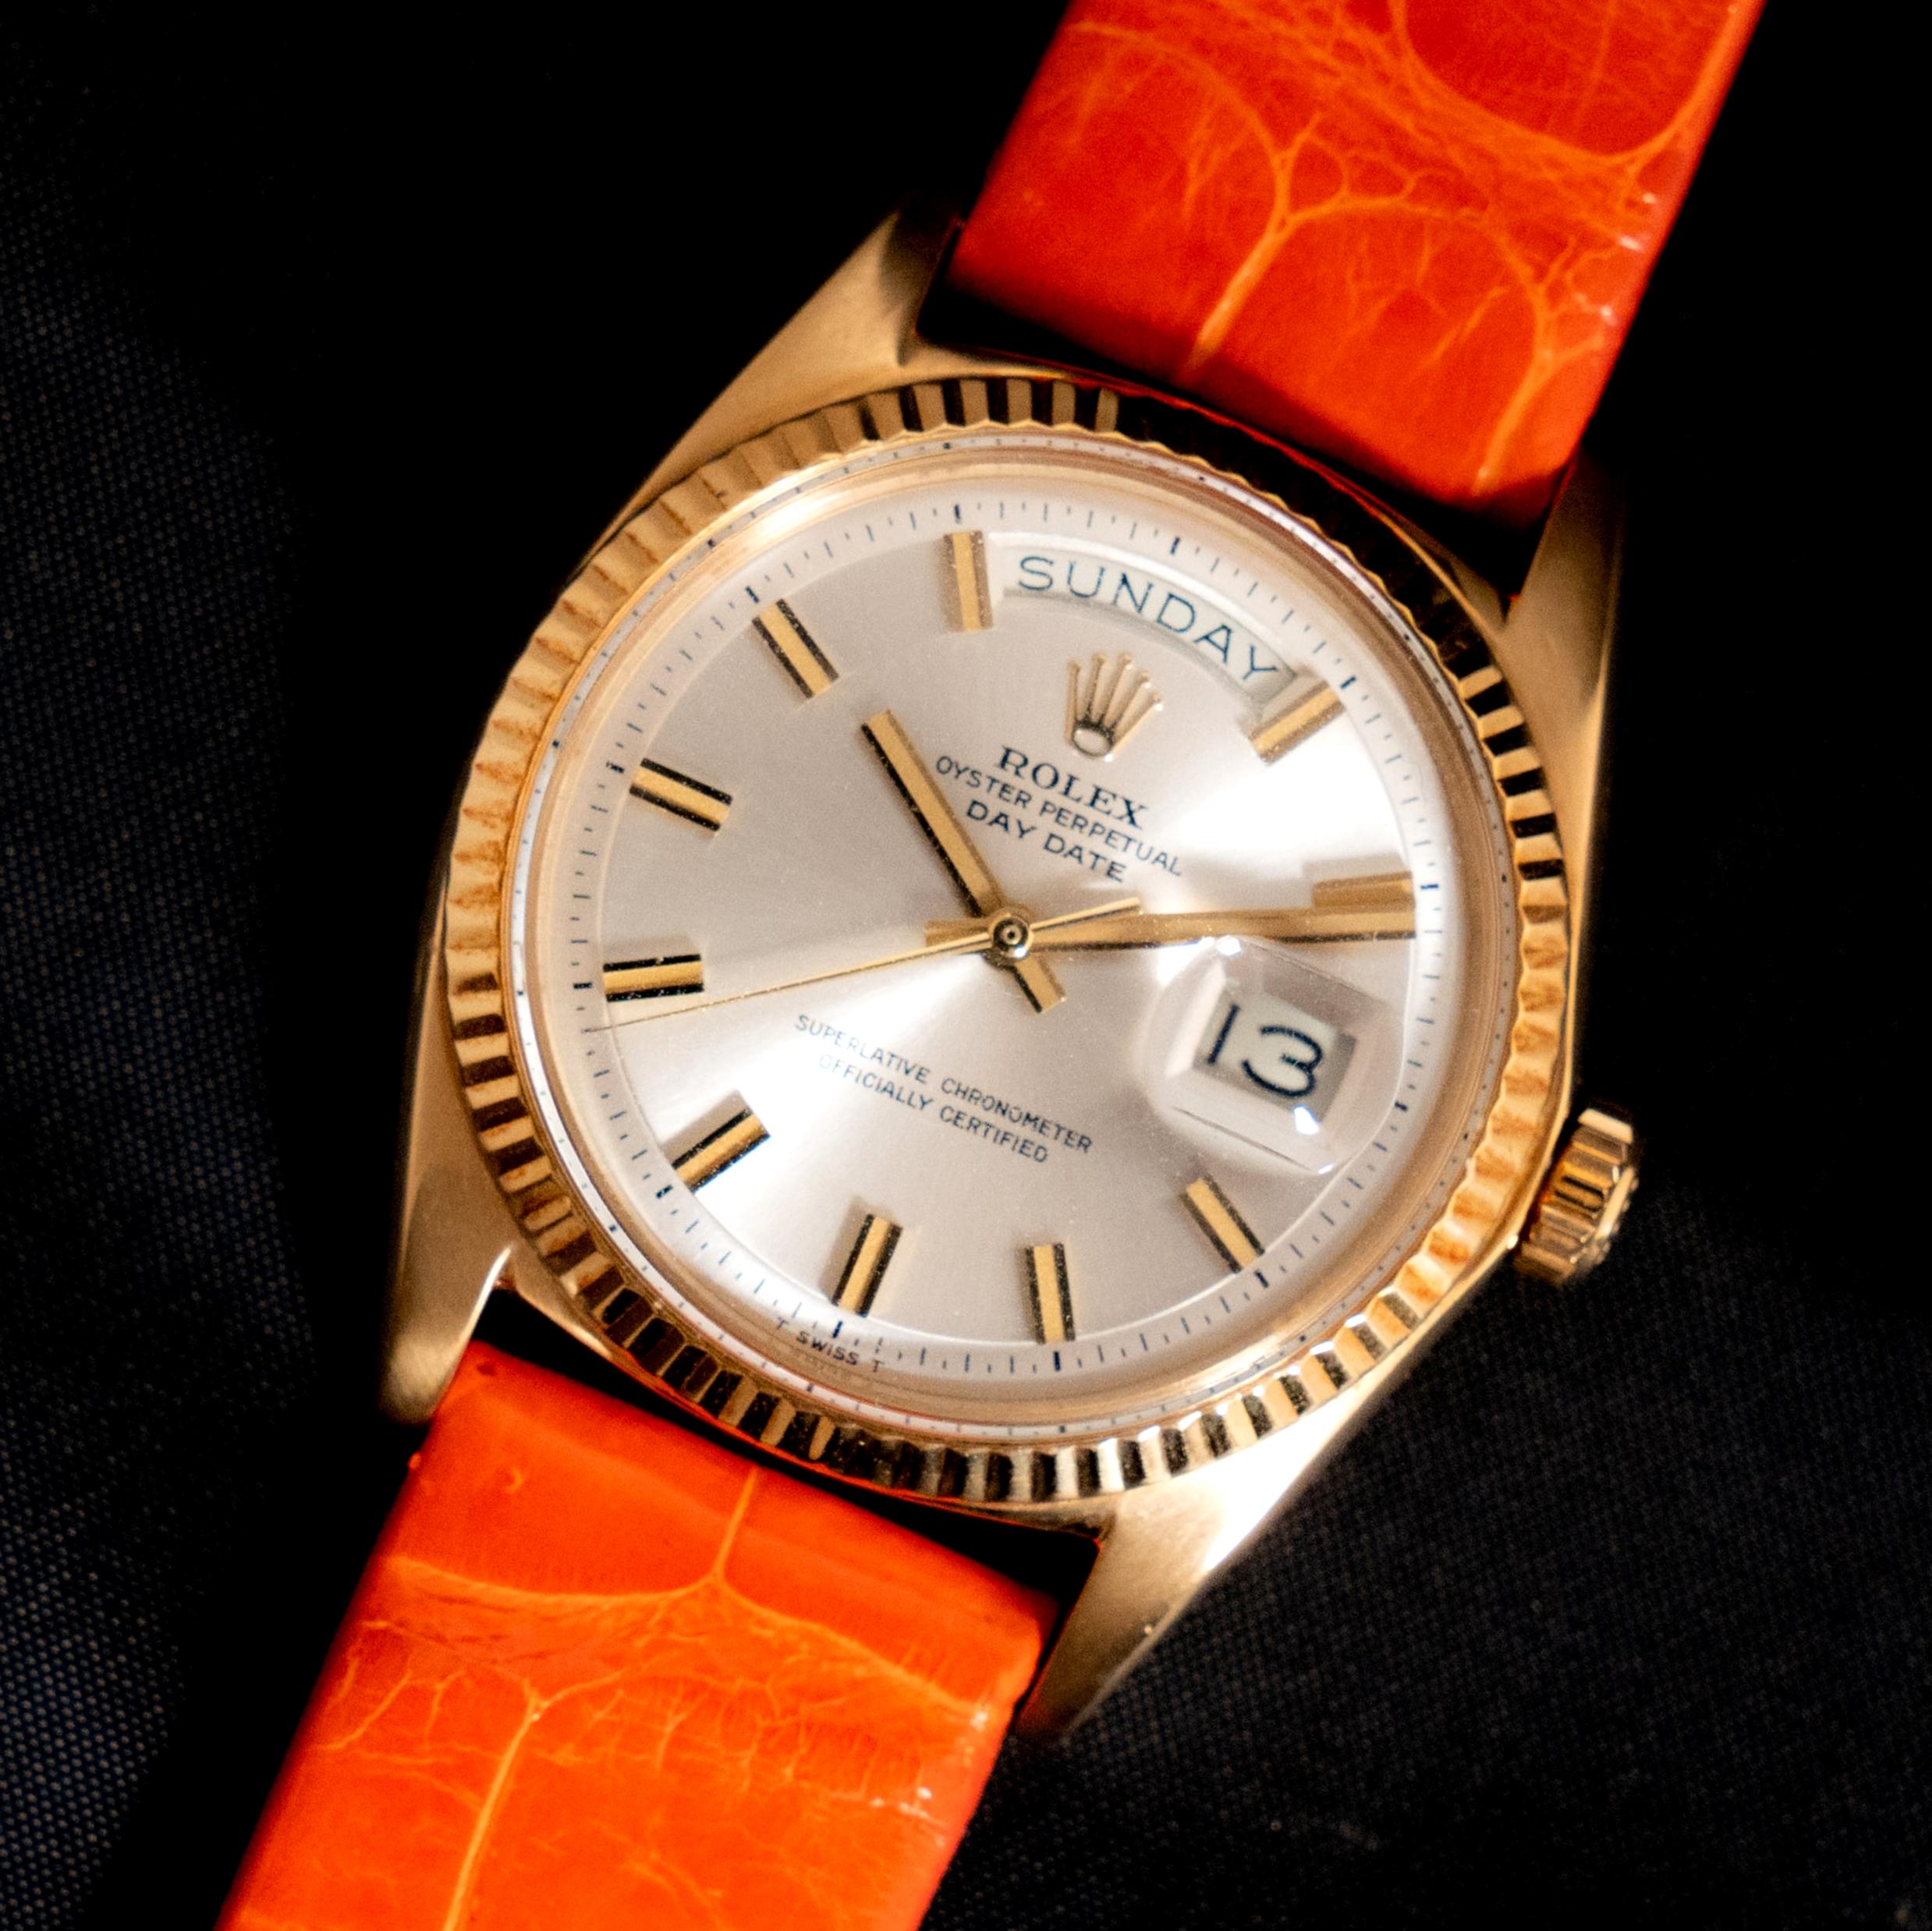 Brand: Vintage Rolex
Model: 1803
Year: 1968
Serial number: 21xxxxx
Reference: C03901

Case: 18K Yellow gold 36mm without crown; Show sign of wear with slight polish from previous; the model and serial number is hard see but can be identify with the